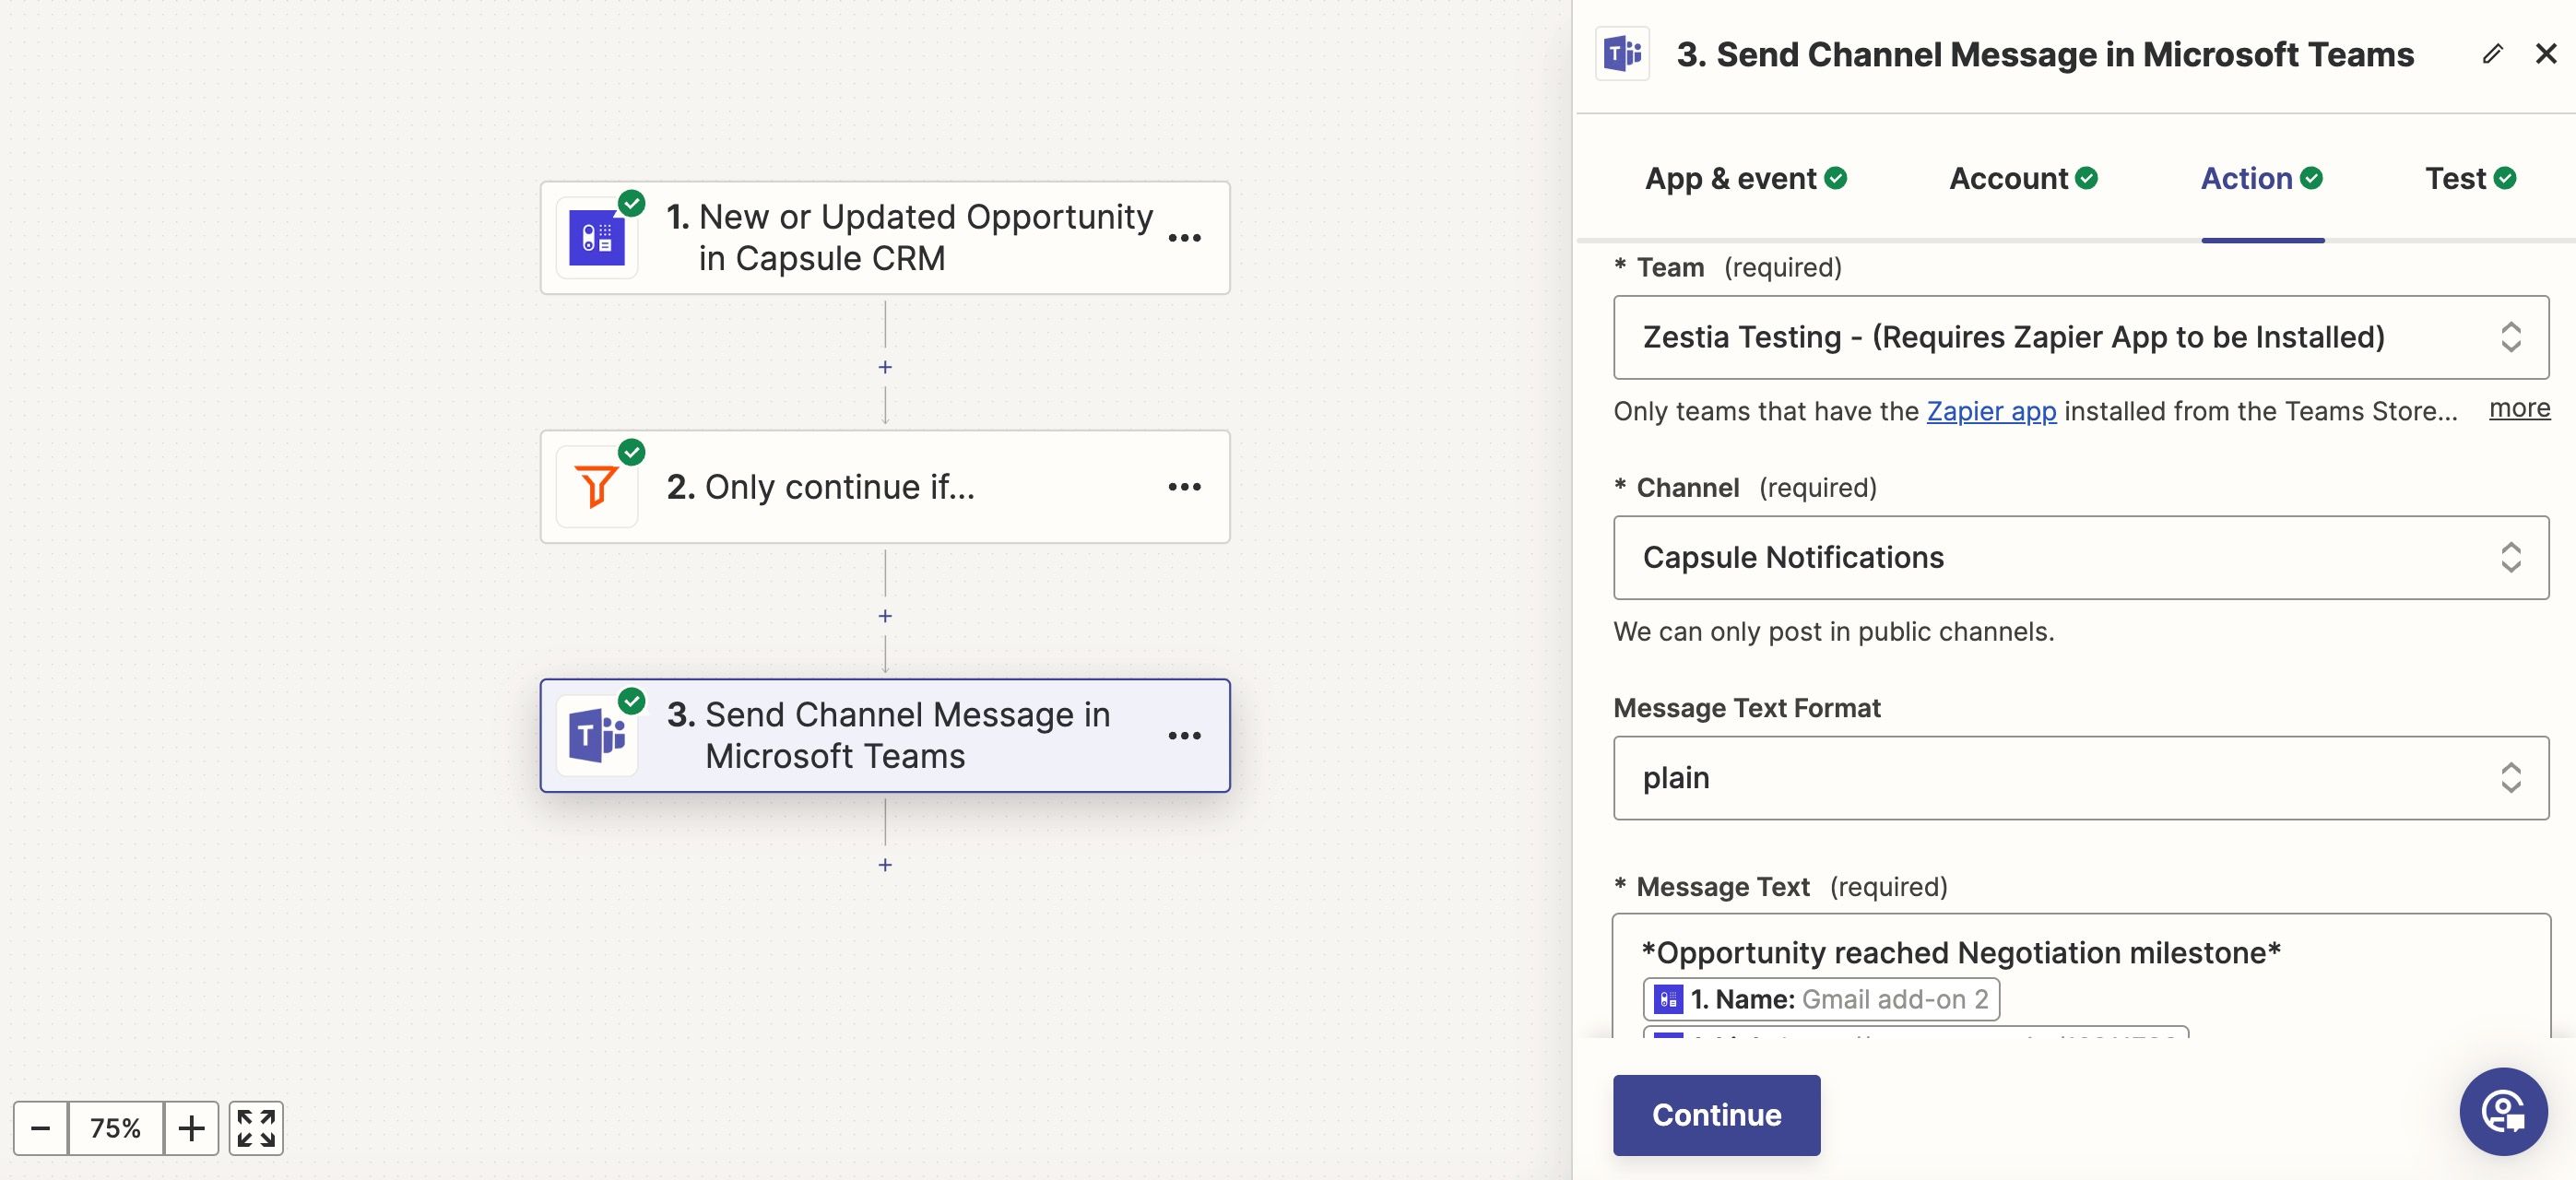 Screenshot showing the options when sending a message to Microsoft Teams